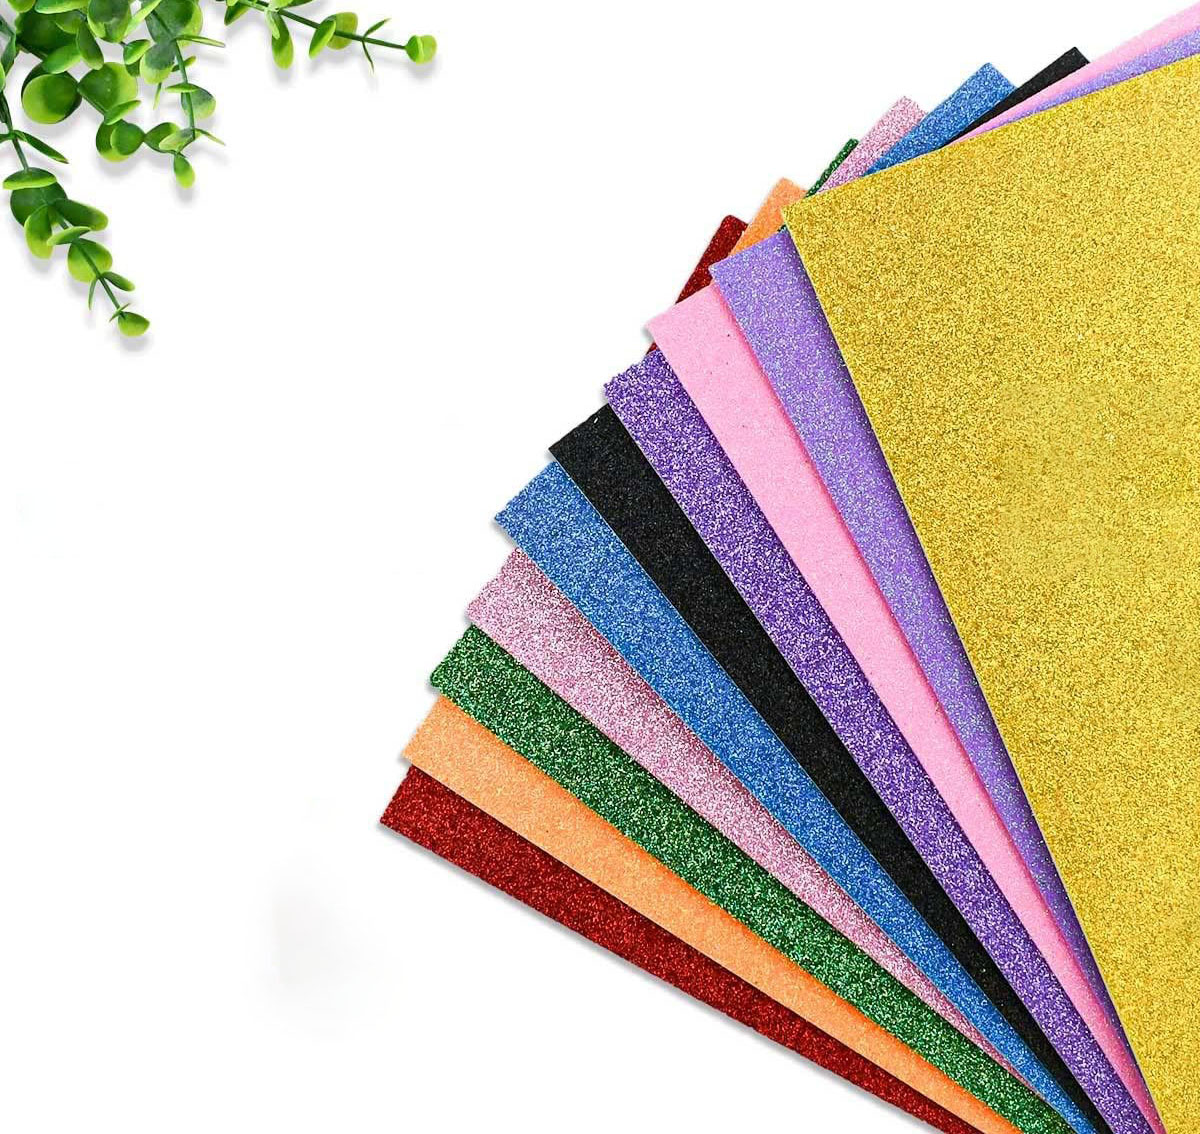 10 Pack Assorted Colors Eva Foam Sheets Glitter Foam Paper For Craft DIY Glitter Cardstock Paper Perfect For Kids Art Projects Classroom Arts Crafts Cosplay Party 2mm Thick 7.87x11.8 Inches By PAIDU